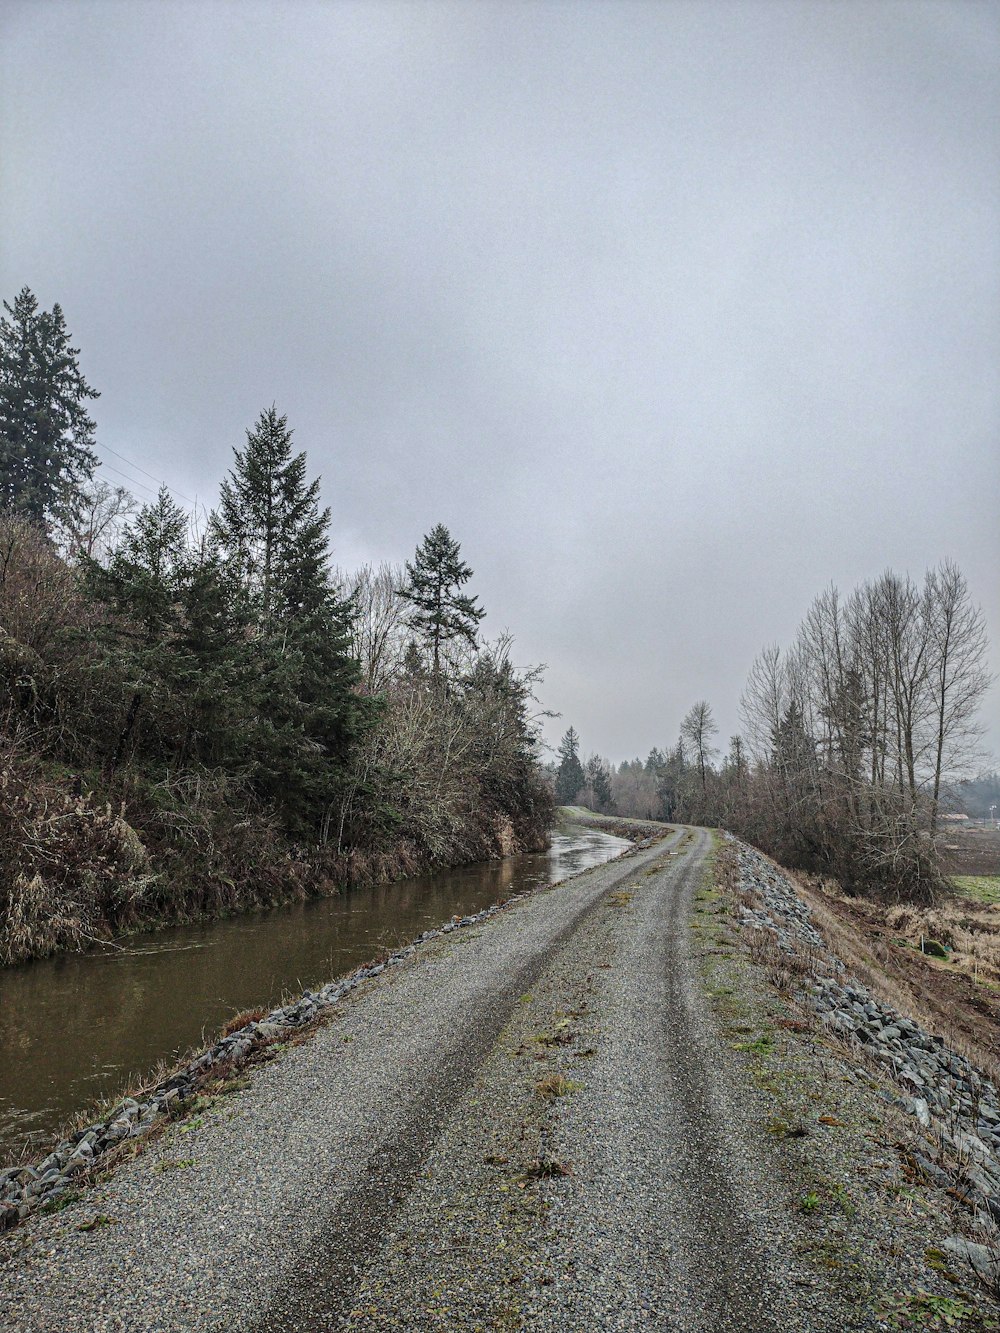 a gravel road next to a body of water